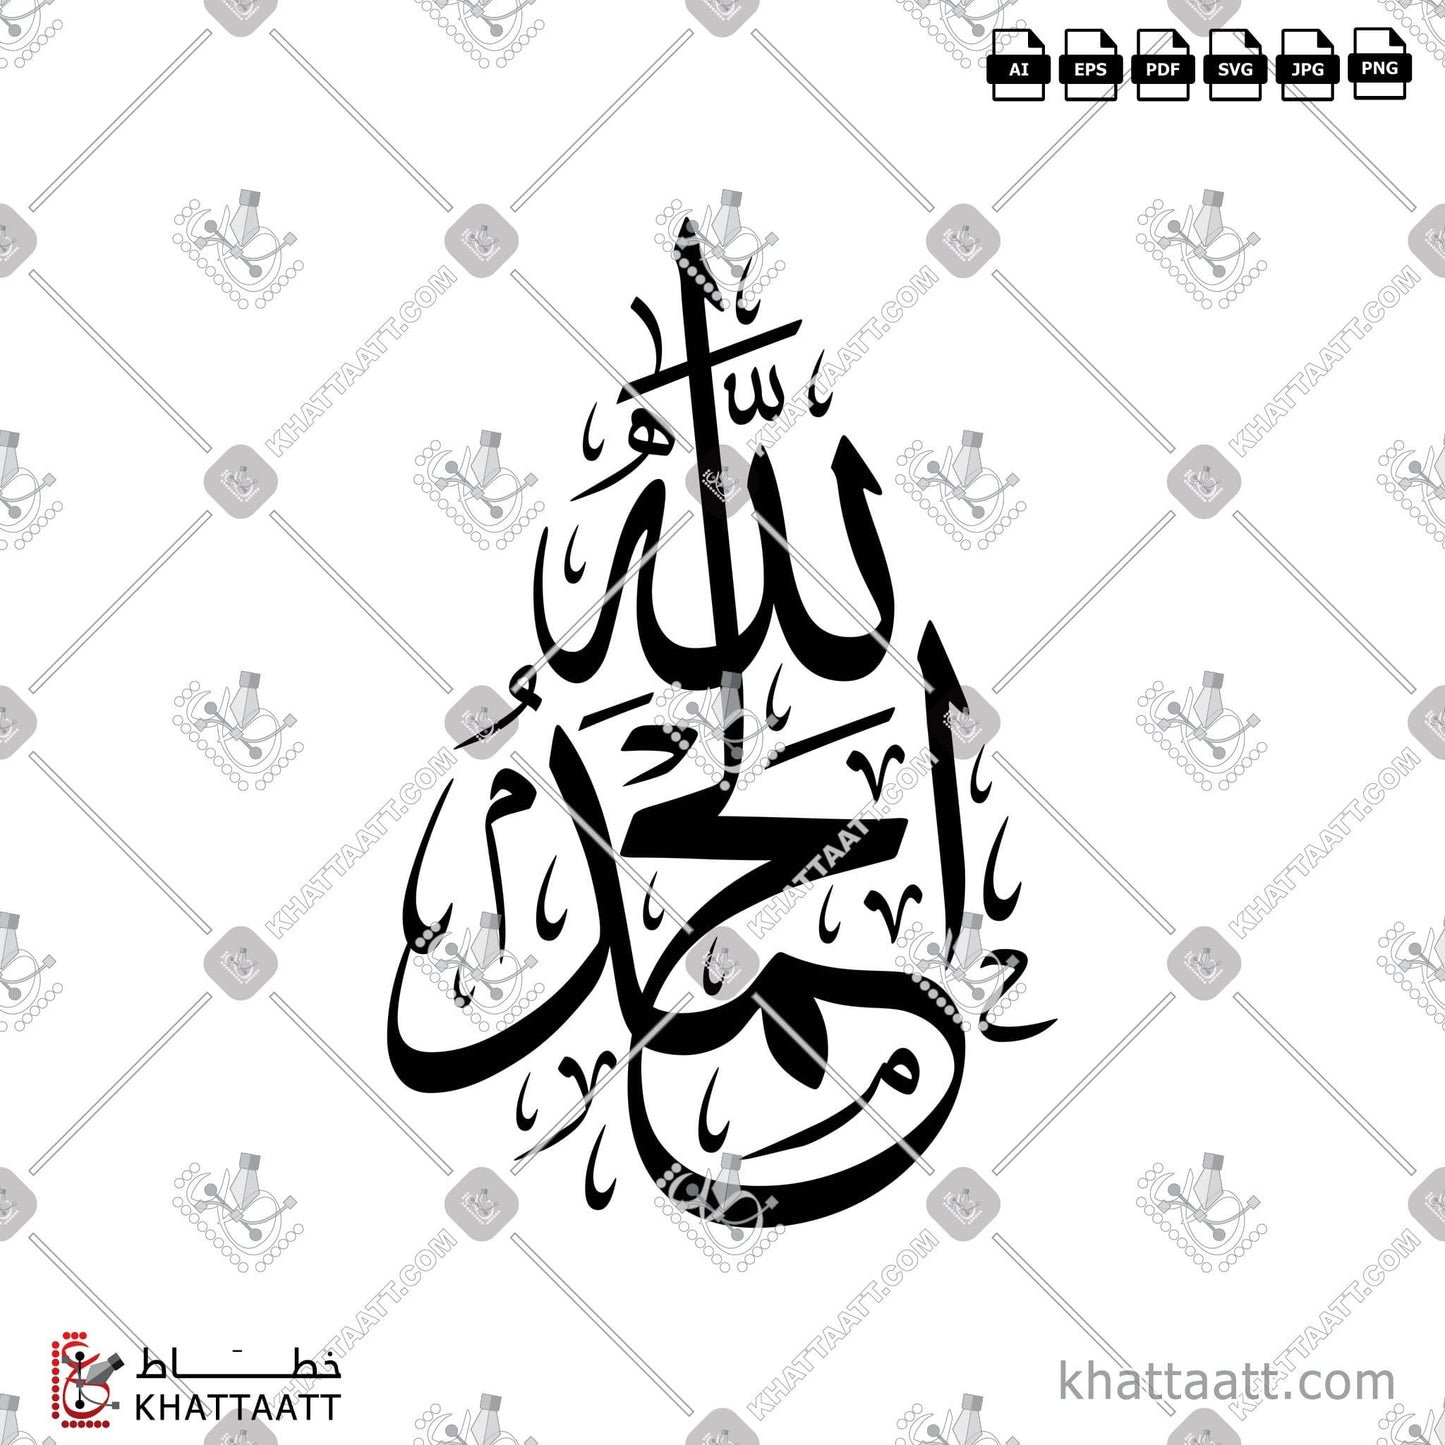 Download Arabic Calligraphy of Alhamdulillah - الحمد لله in Thuluth - خط الثلث in vector and .png